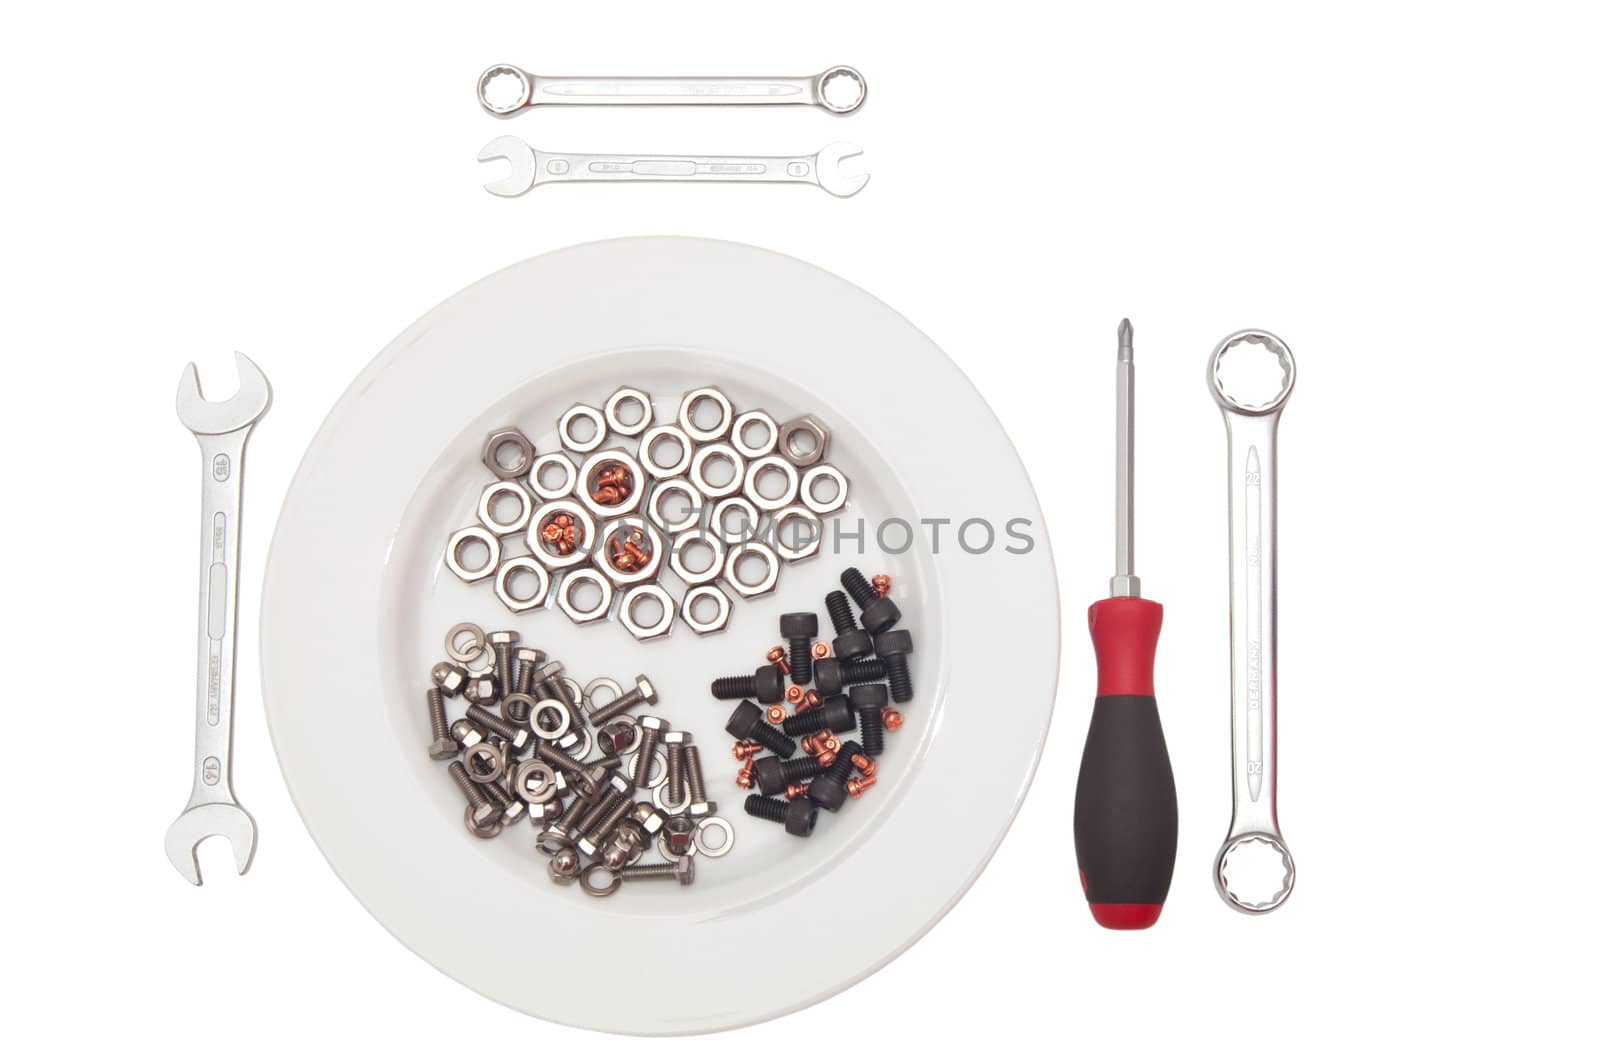 Cover charge from screws to tools as cutlery.